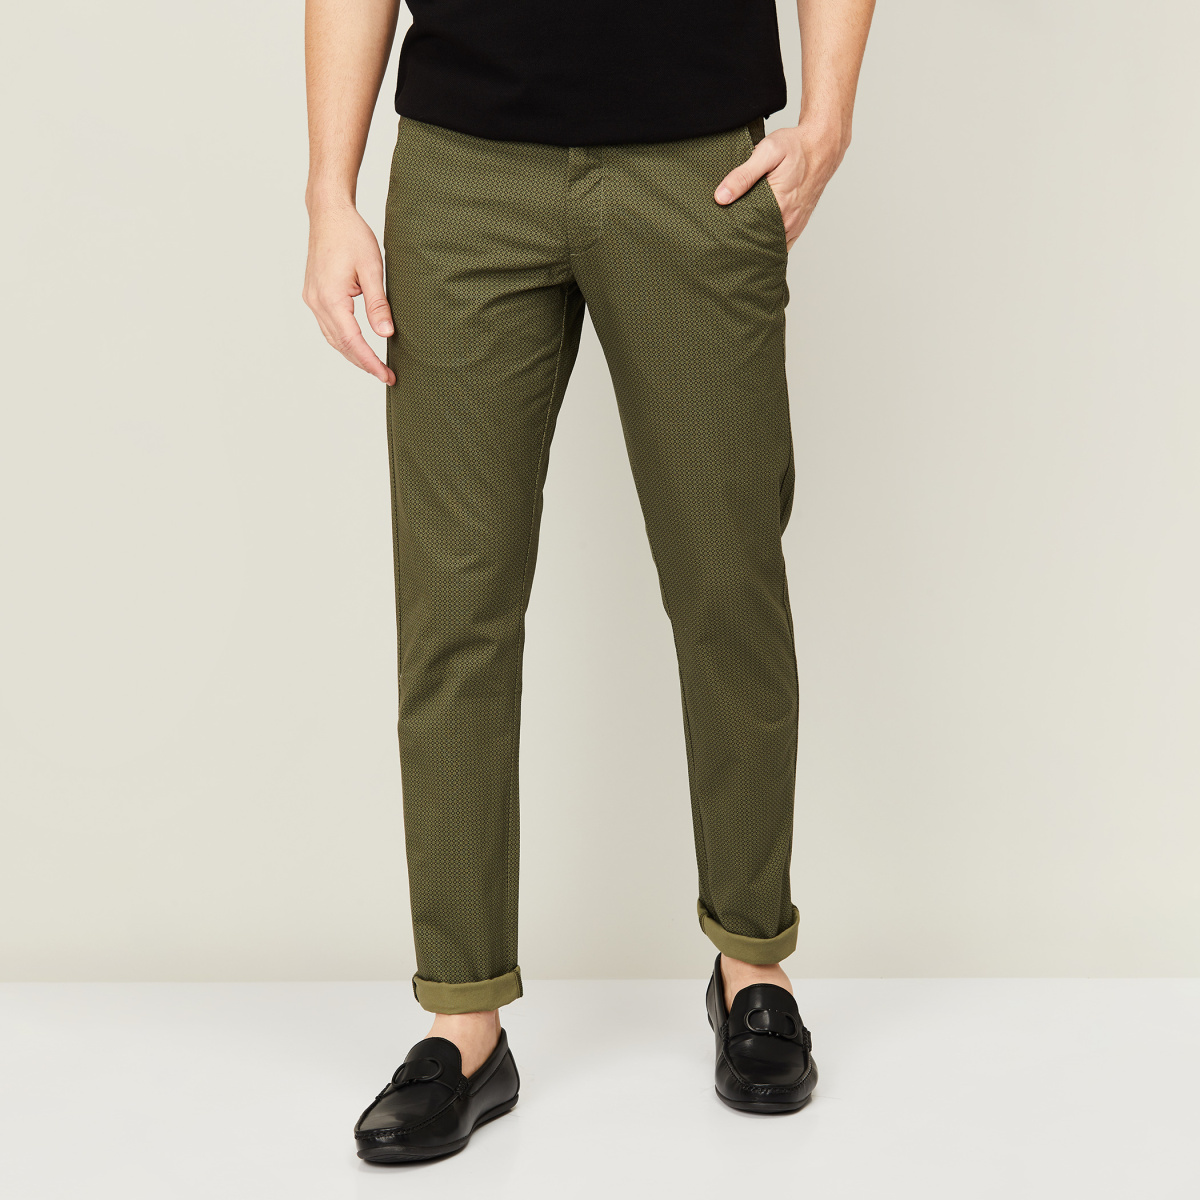 Buy Men Olive Slim Fit Solid Casual Trousers Online  644892  Allen Solly